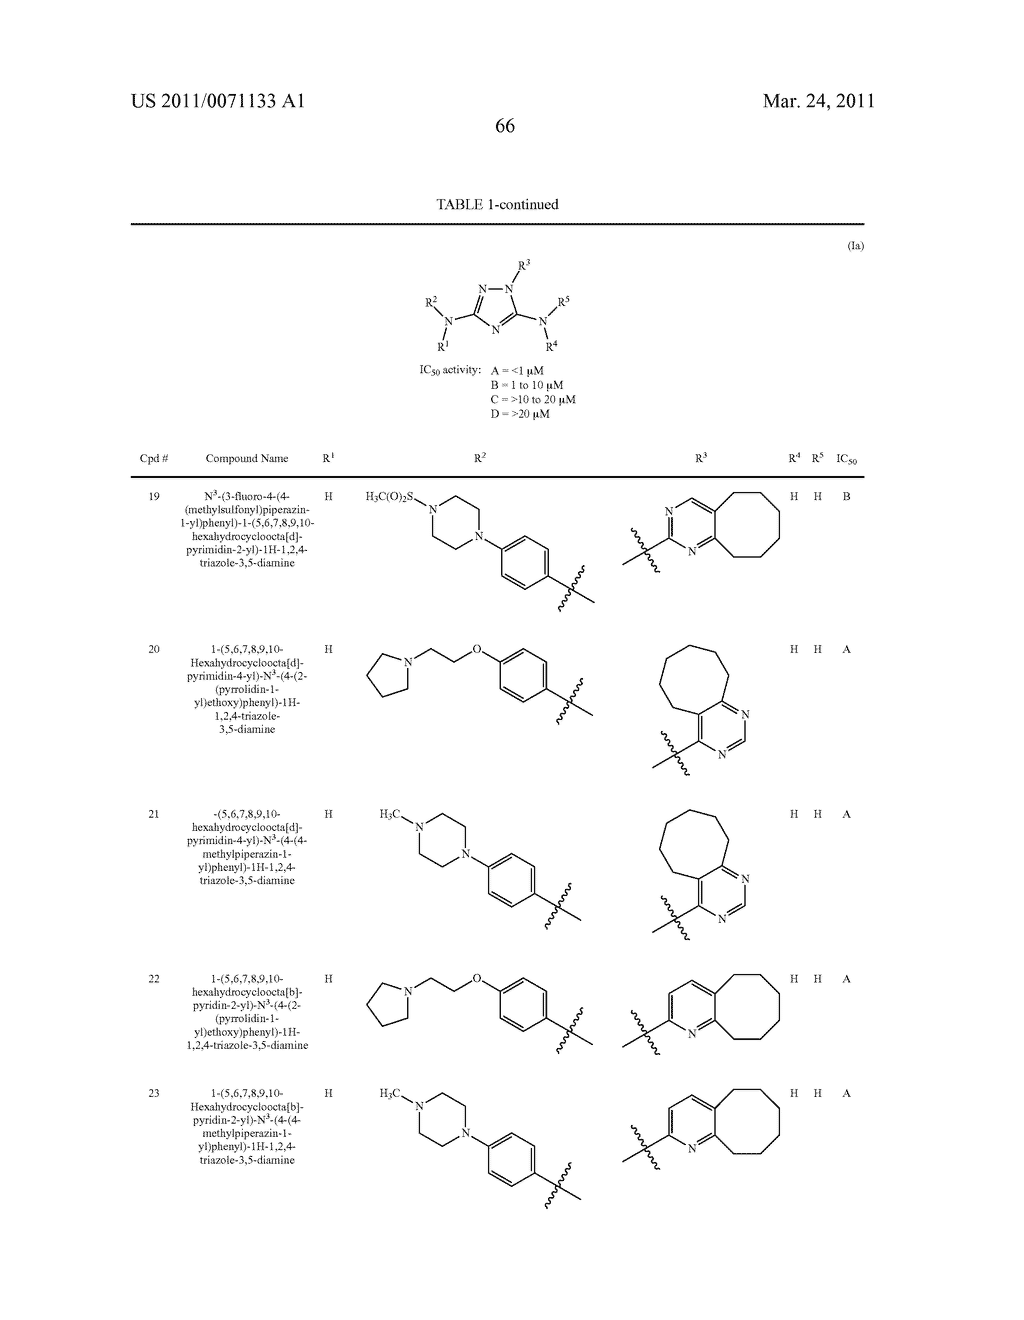 BICYCLIC ARYL AND BICYCLIC HETEROARYL SUBSTITUTED TRIAZOLES USEFUL AS AXL INHIBITORS - diagram, schematic, and image 67